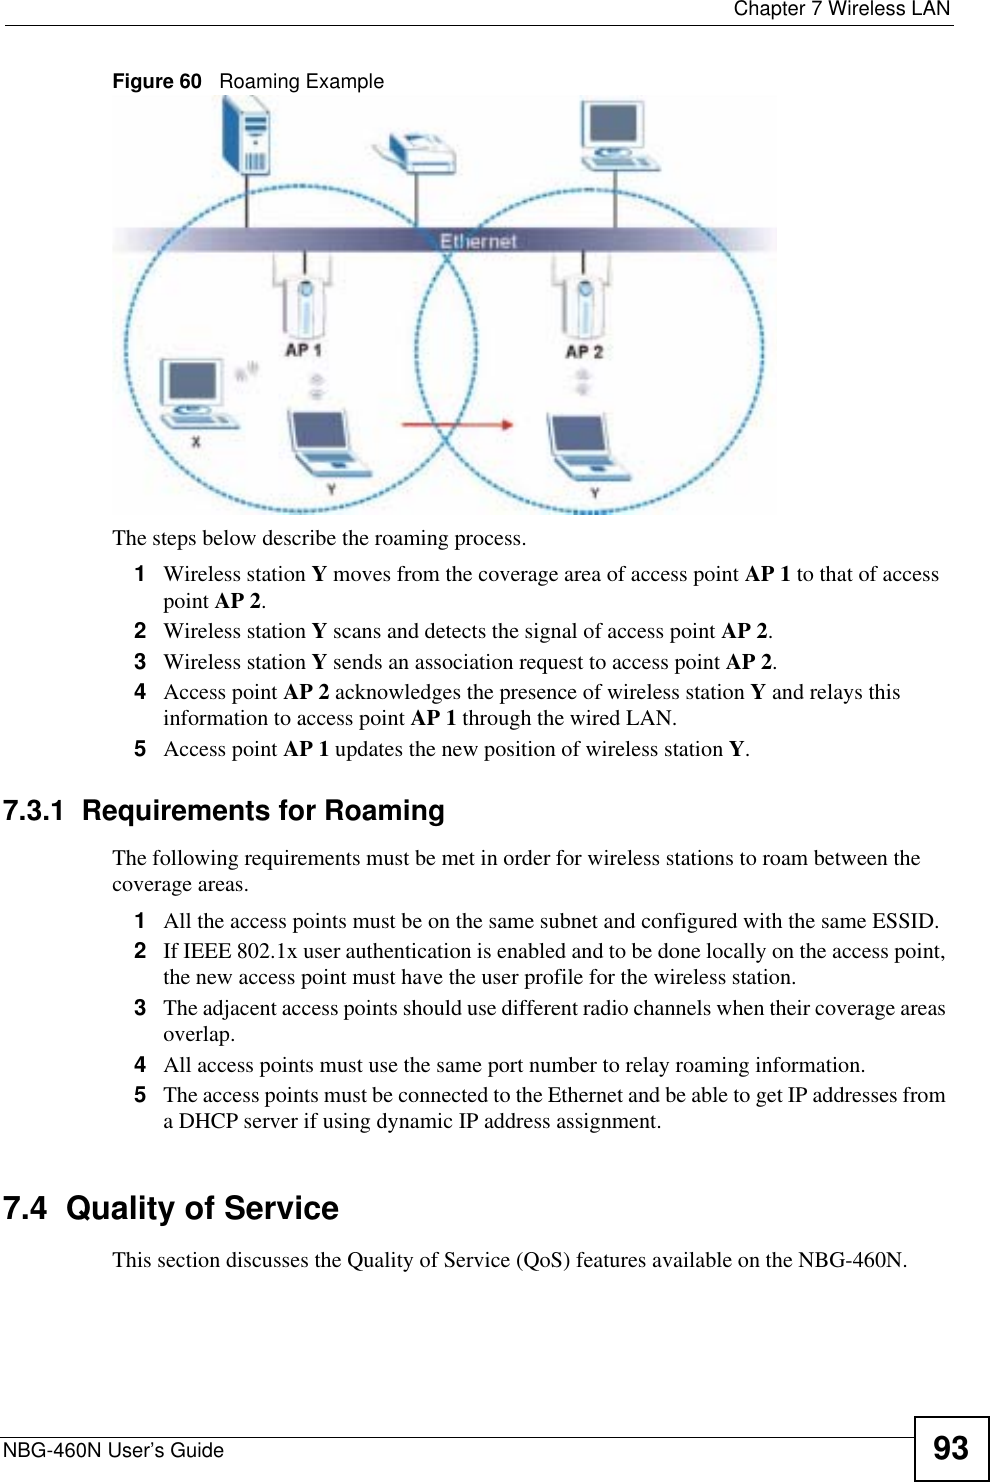  Chapter 7 Wireless LANNBG-460N User’s Guide 93Figure 60   Roaming ExampleThe steps below describe the roaming process.1Wireless station Y moves from the coverage area of access point AP 1 to that of access point AP 2.2Wireless station Y scans and detects the signal of access point AP 2.3Wireless station Y sends an association request to access point AP 2.4Access point AP 2 acknowledges the presence of wireless station Y and relays this information to access point AP 1 through the wired LAN. 5Access point AP 1 updates the new position of wireless station Y.7.3.1  Requirements for RoamingThe following requirements must be met in order for wireless stations to roam between the coverage areas. 1All the access points must be on the same subnet and configured with the same ESSID. 2If IEEE 802.1x user authentication is enabled and to be done locally on the access point, the new access point must have the user profile for the wireless station.3The adjacent access points should use different radio channels when their coverage areas overlap. 4All access points must use the same port number to relay roaming information. 5The access points must be connected to the Ethernet and be able to get IP addresses from a DHCP server if using dynamic IP address assignment. 7.4  Quality of ServiceThis section discusses the Quality of Service (QoS) features available on the NBG-460N.